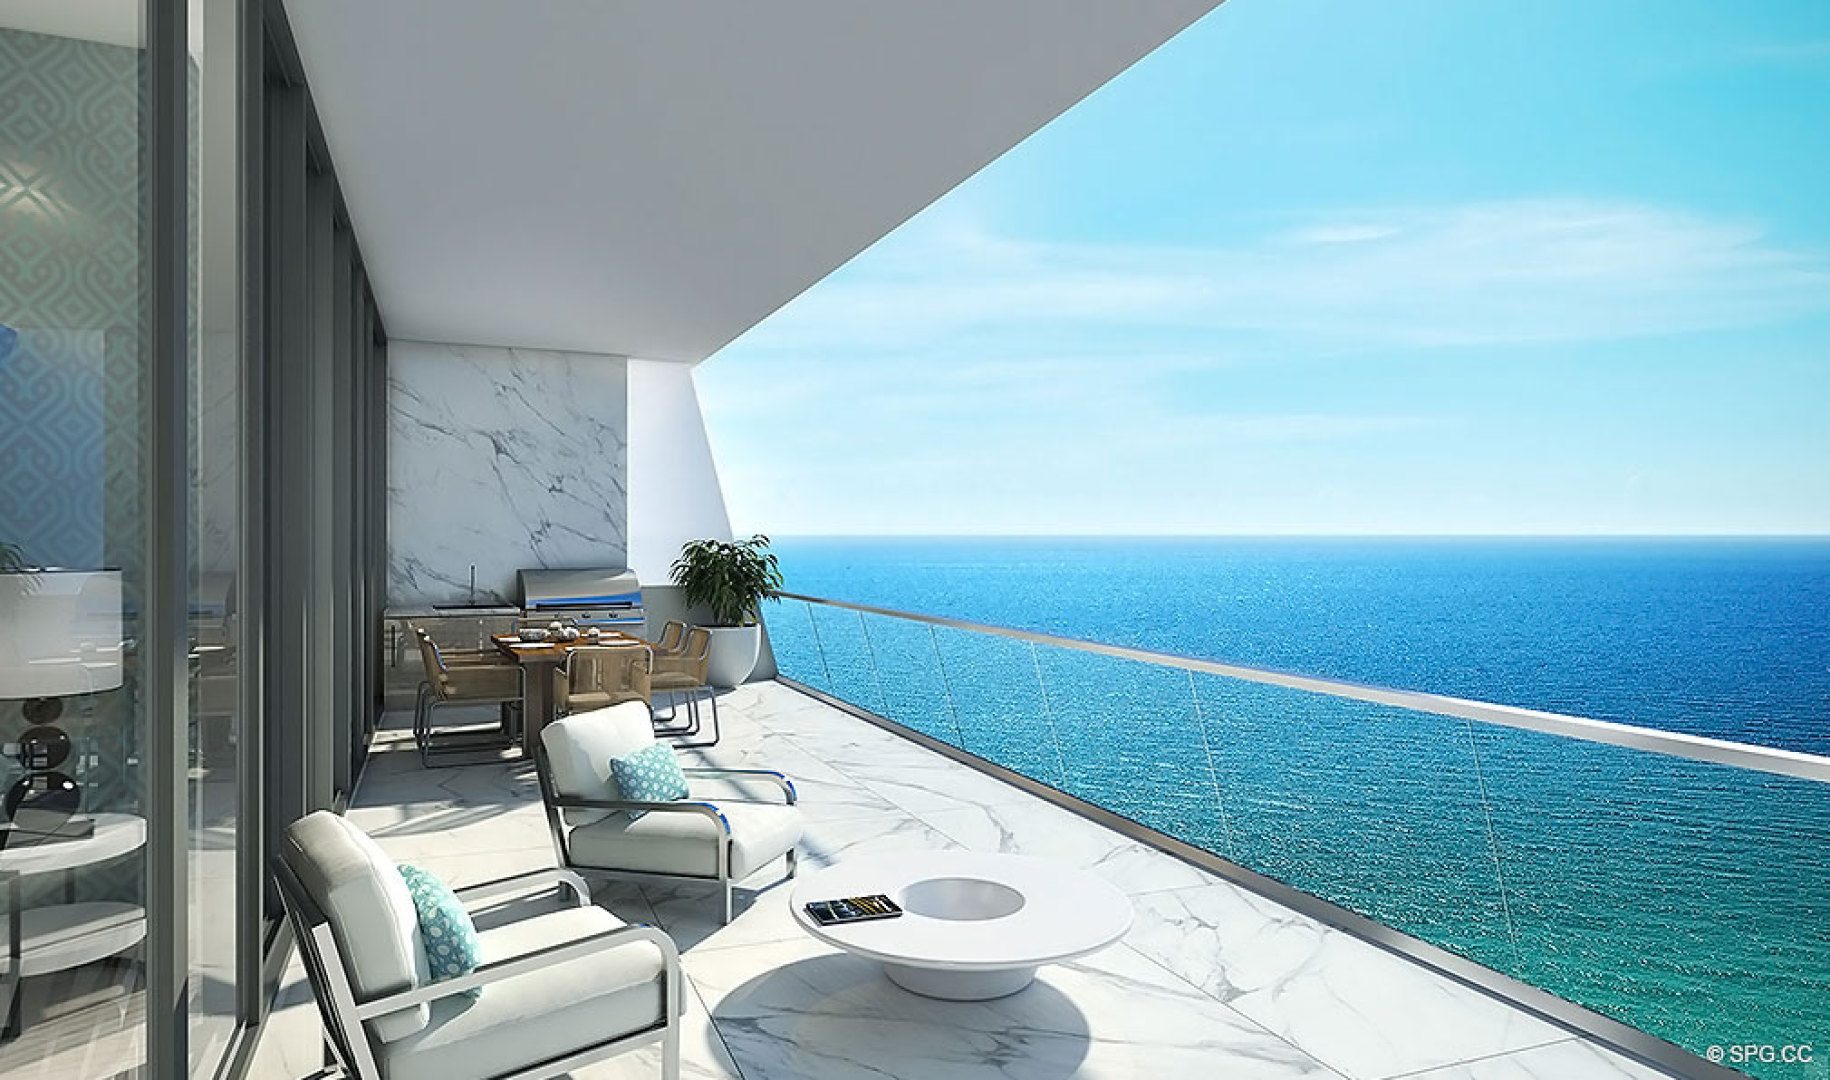 Large Private Terraces at Turnberry Ocean Club, Luxury Oceanfront Condos Located at 18501 Collins Avenue, Sunny Isles Beach, Miami 33160